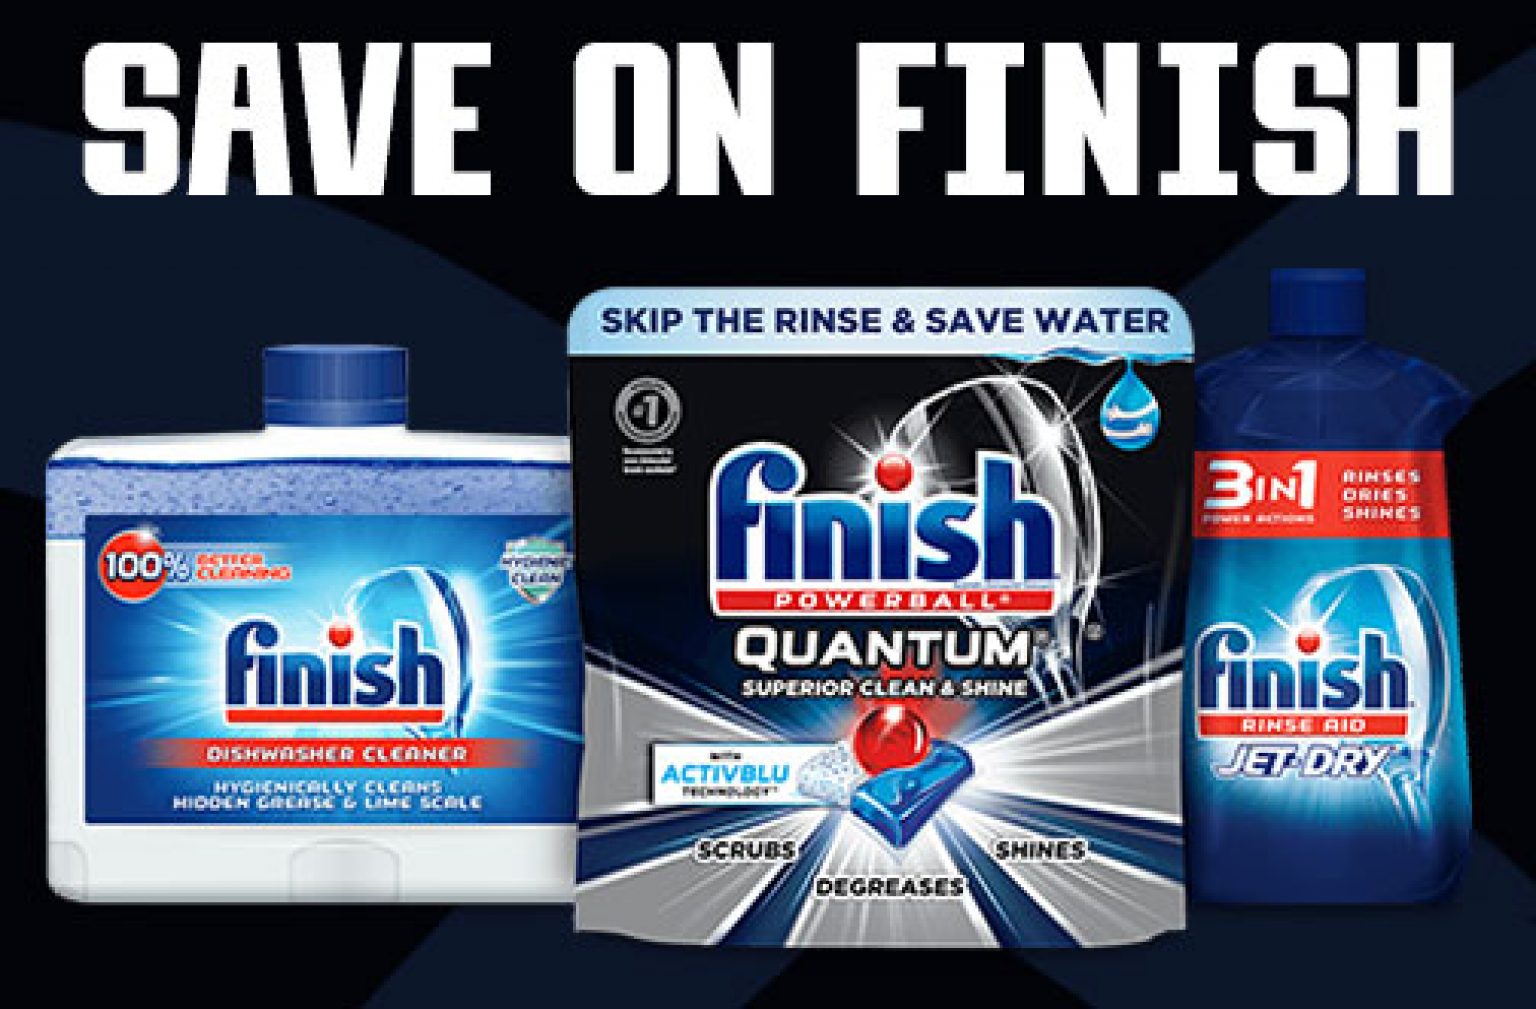 Finish Dishwashing Coupons — Deals from SaveaLoonie!